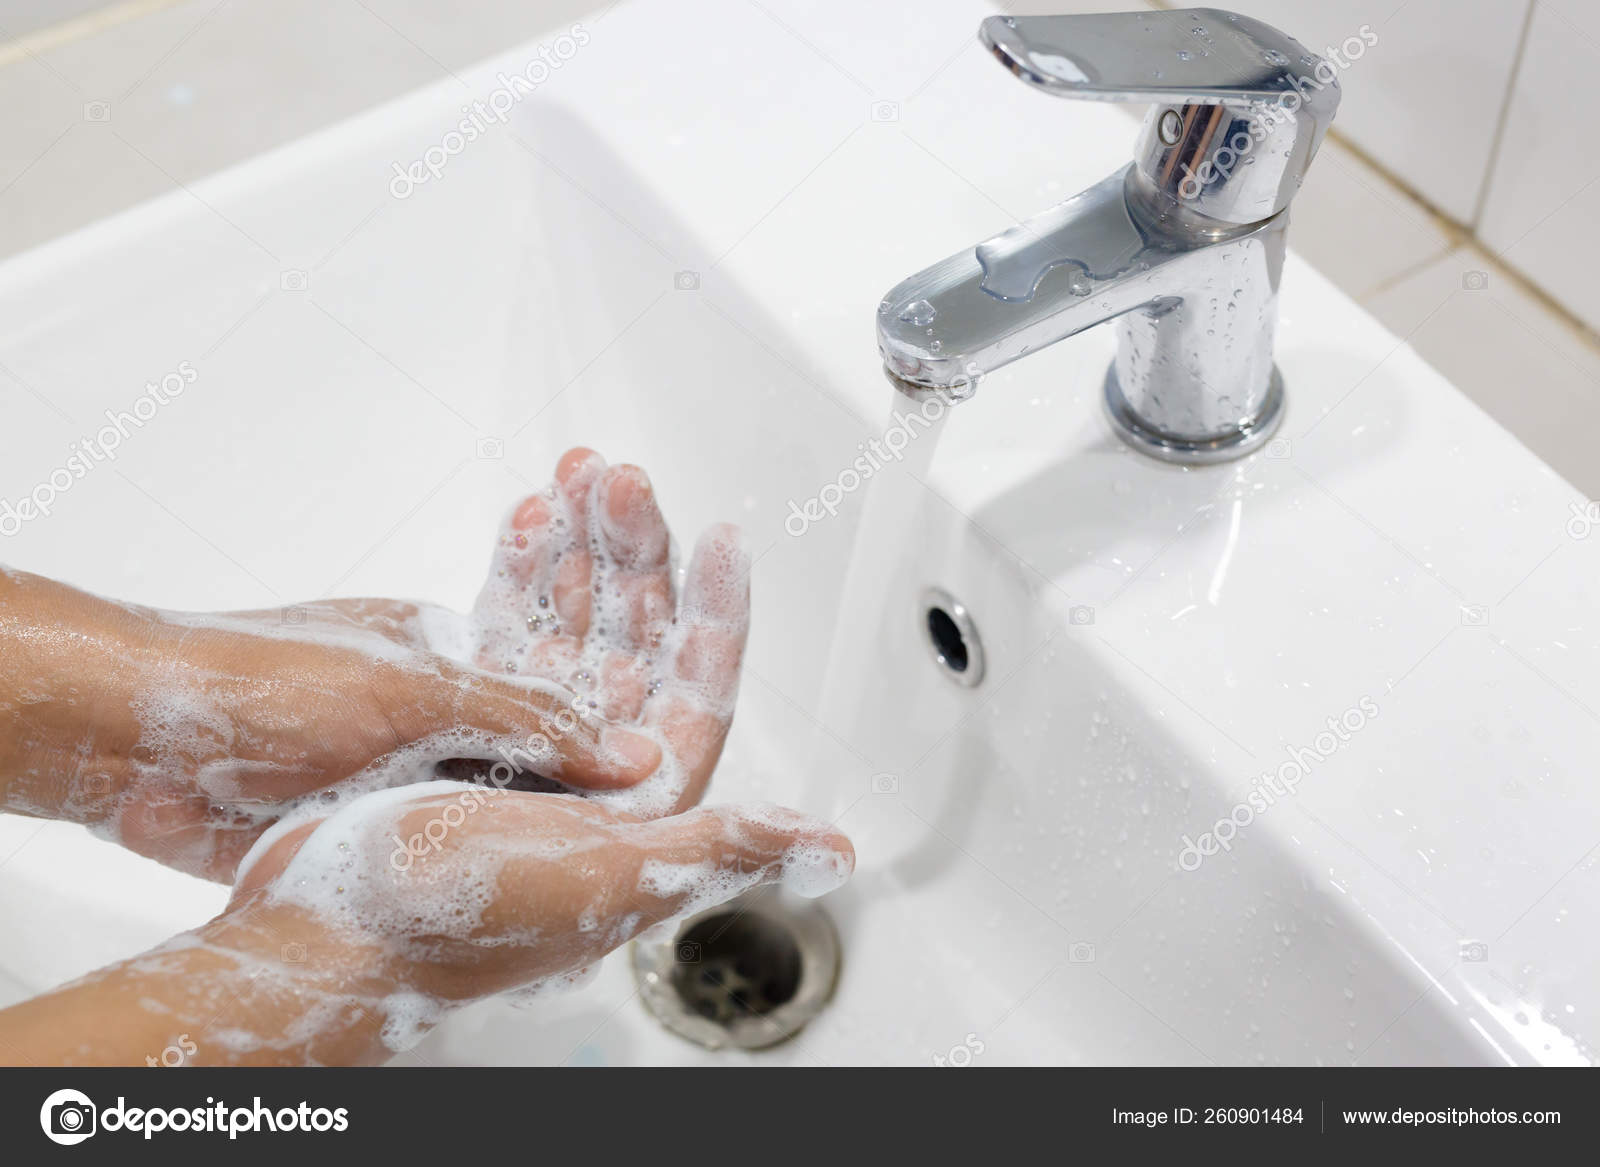 Hygiene Cleaning Hands Washing Hands Soap Faucet Water Pay Dirt